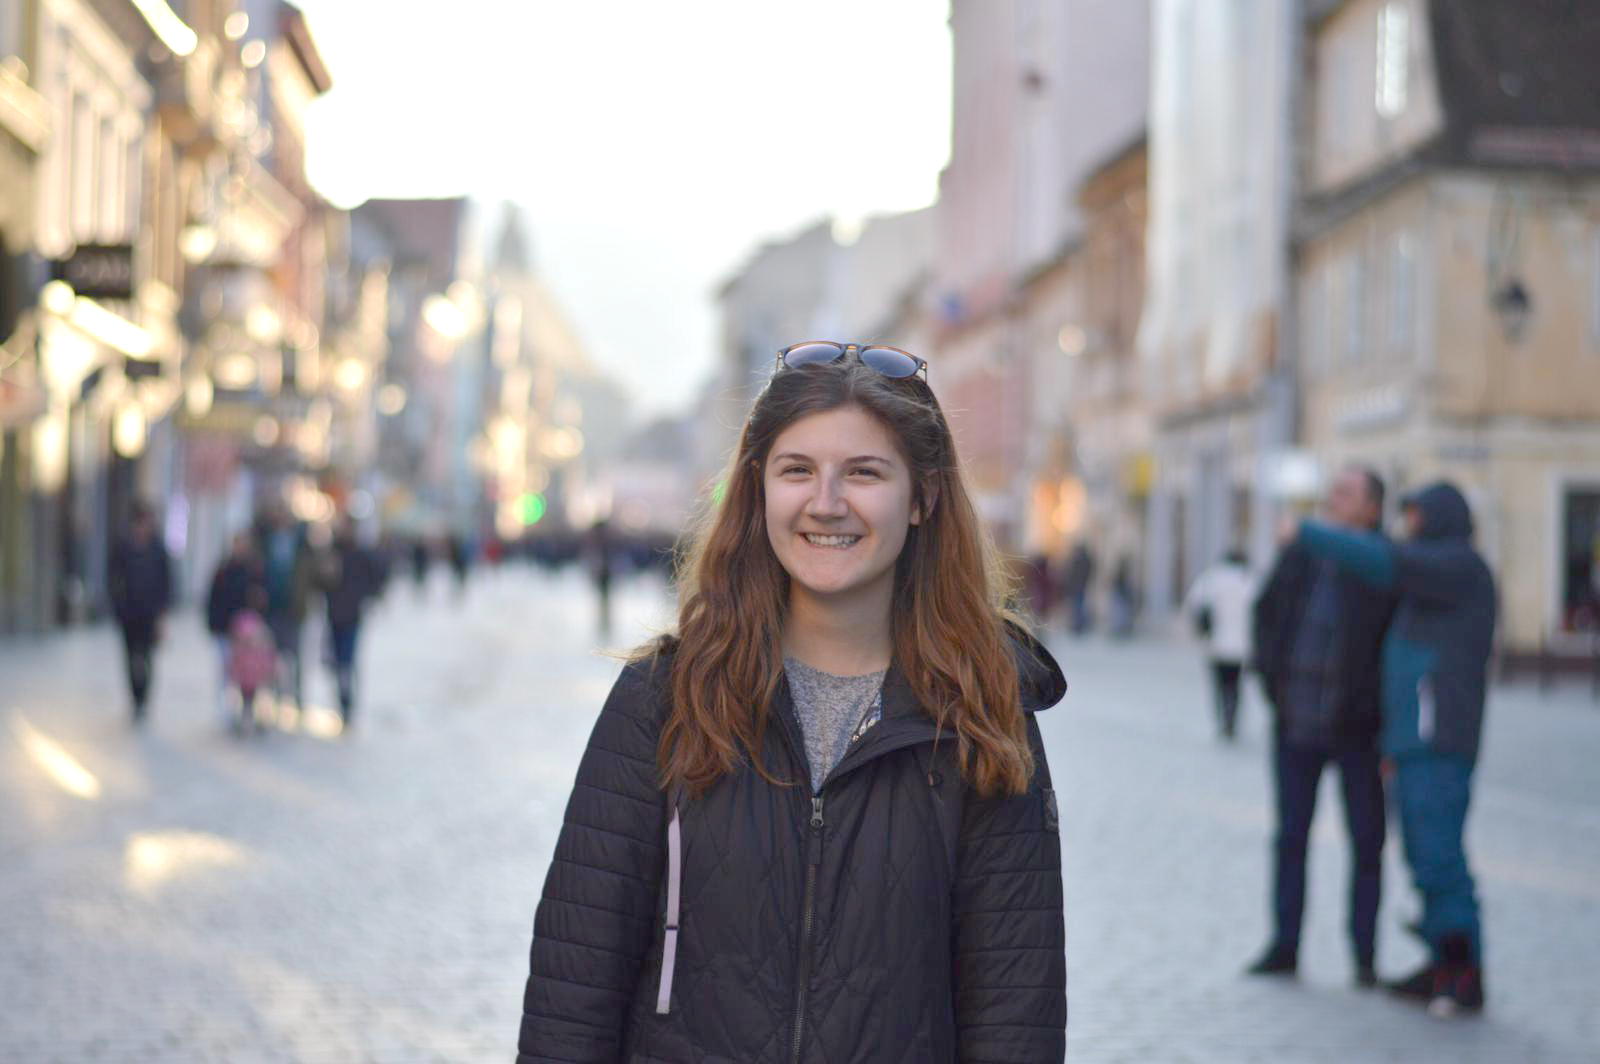 Sophomore English major Quincy Hanzen is currently studying abroad at the American University of Bulgaria with students from a variety of backgrounds including: Germany, Portugal, Poland, the Netherlands, France, Belgium and Spain.